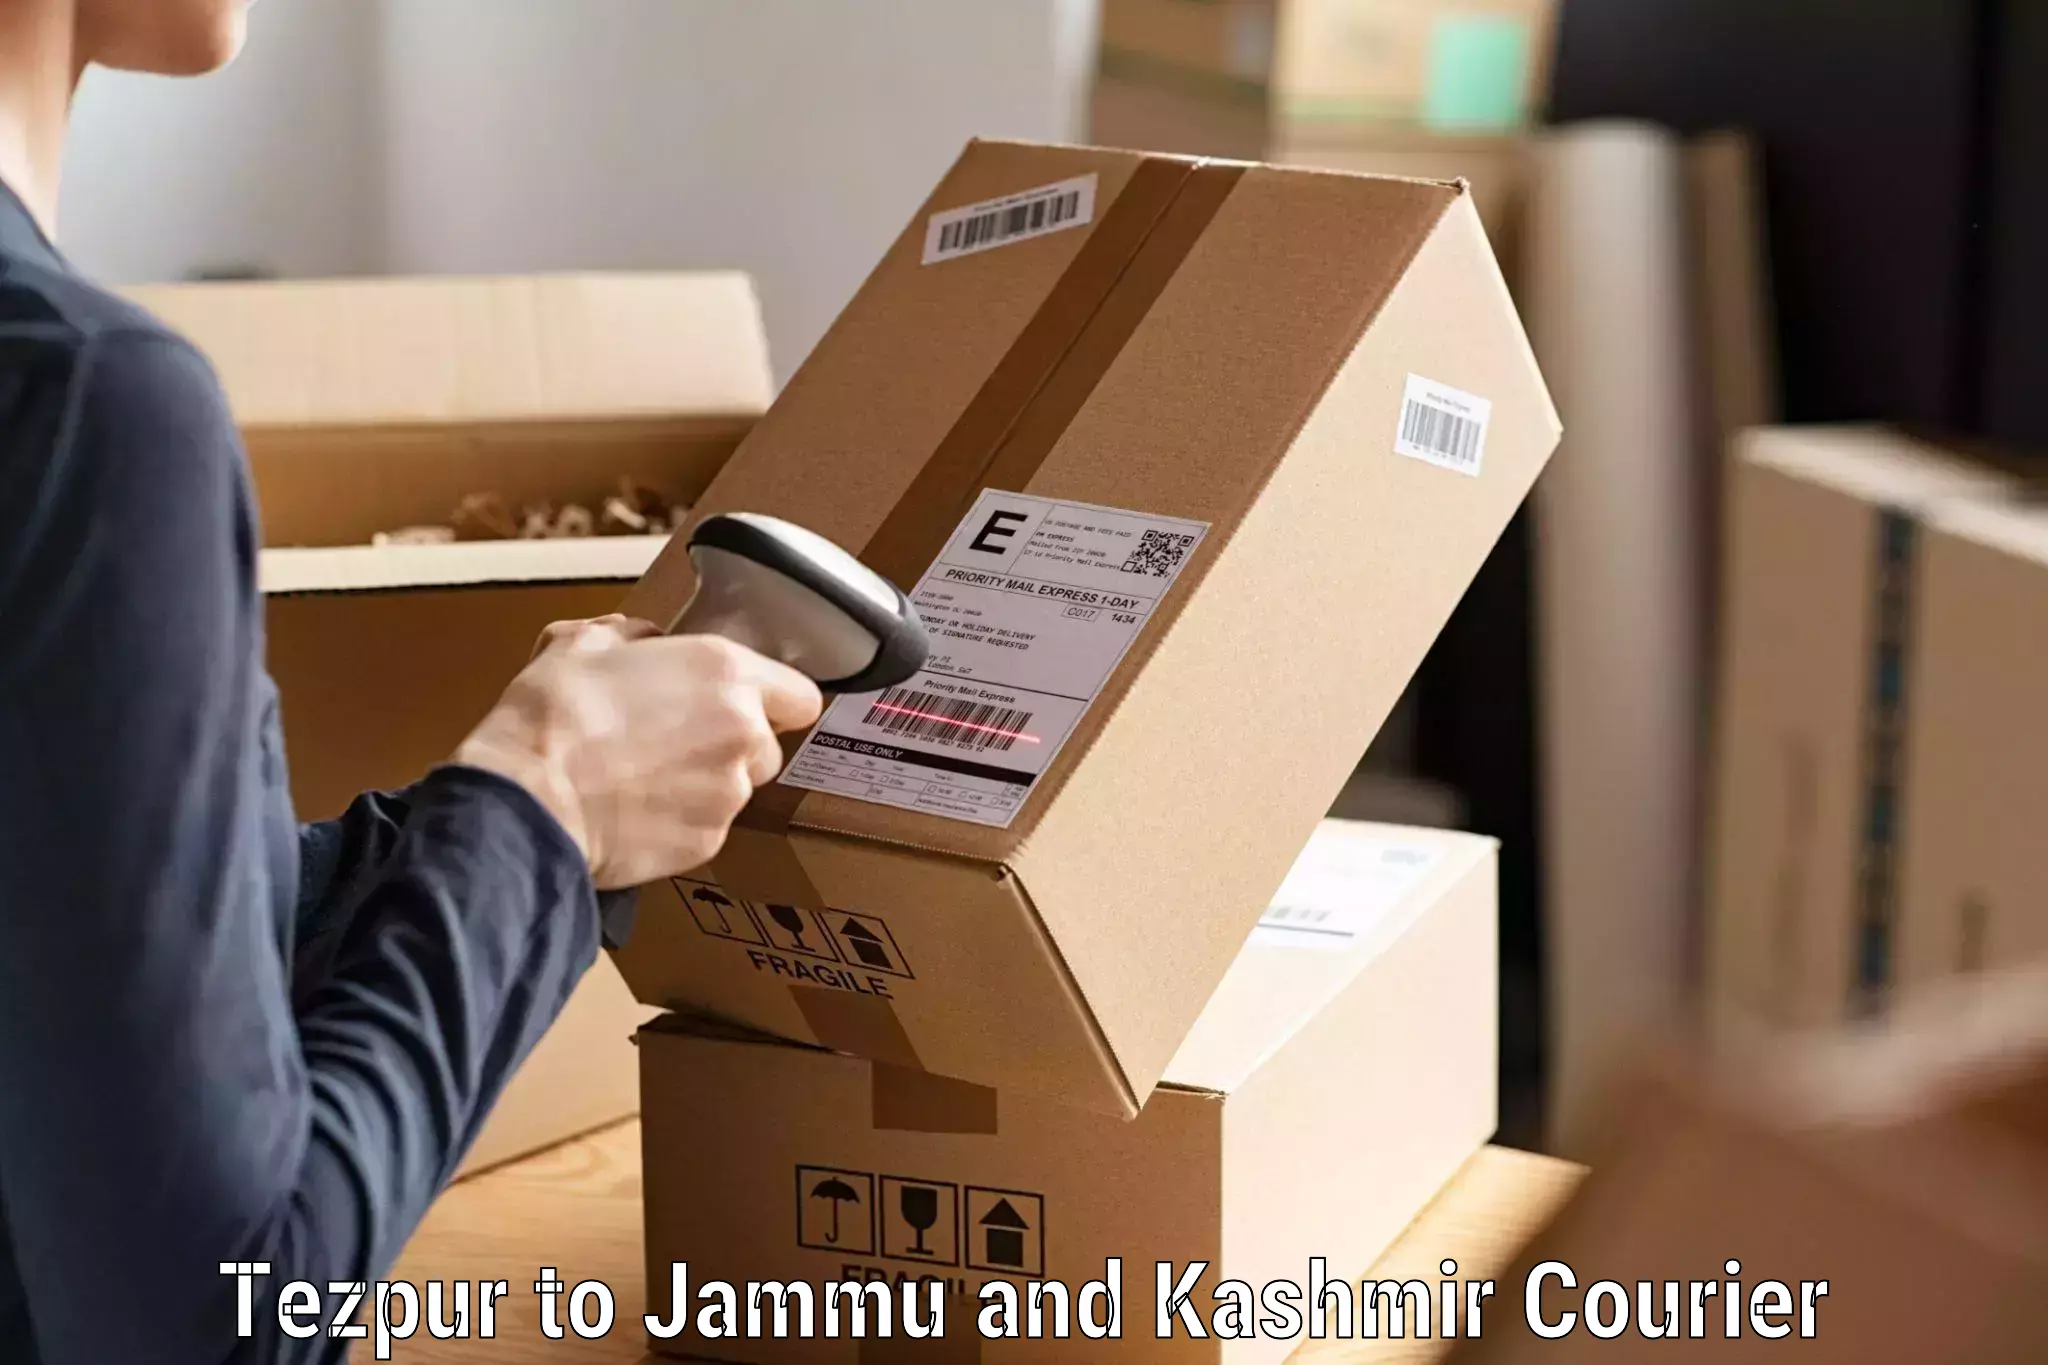 24/7 courier service Tezpur to Jammu